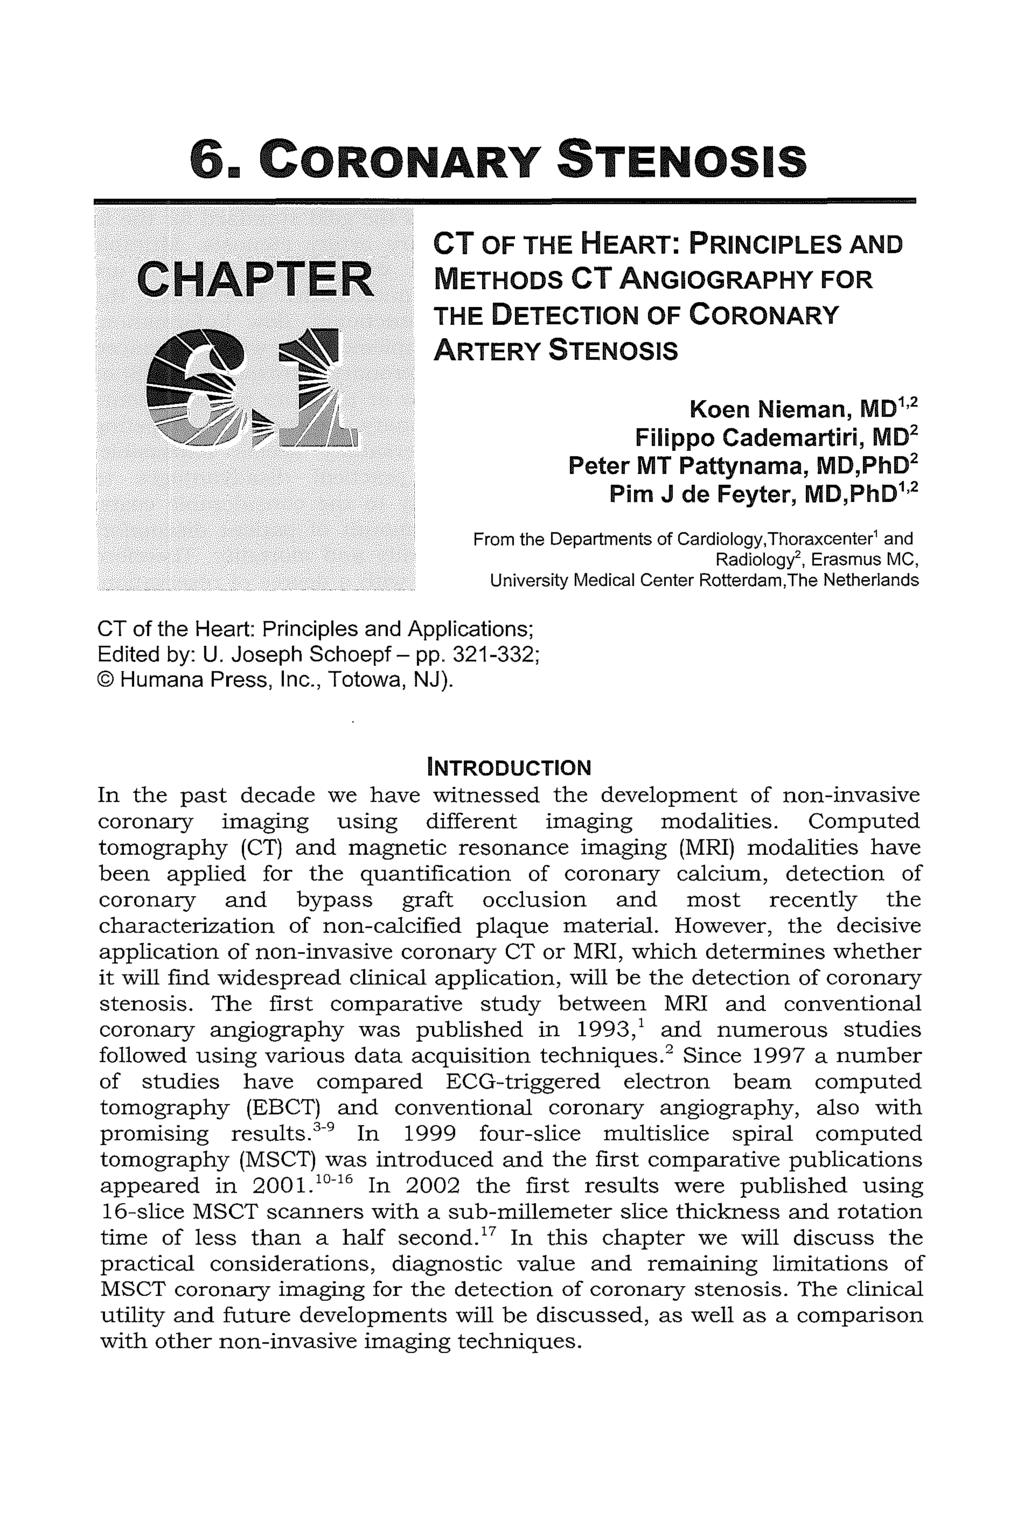 6.. CORONARY STENOSIS CHAPTER CT OF THE HEART: PRINCIPLES AND METHODS CT ANGIOGRAPHY FOR THE DETECTION OF CORONARY ARTERY STENOSIS CT of the Heart: Principles and Applications; Edited by: U.